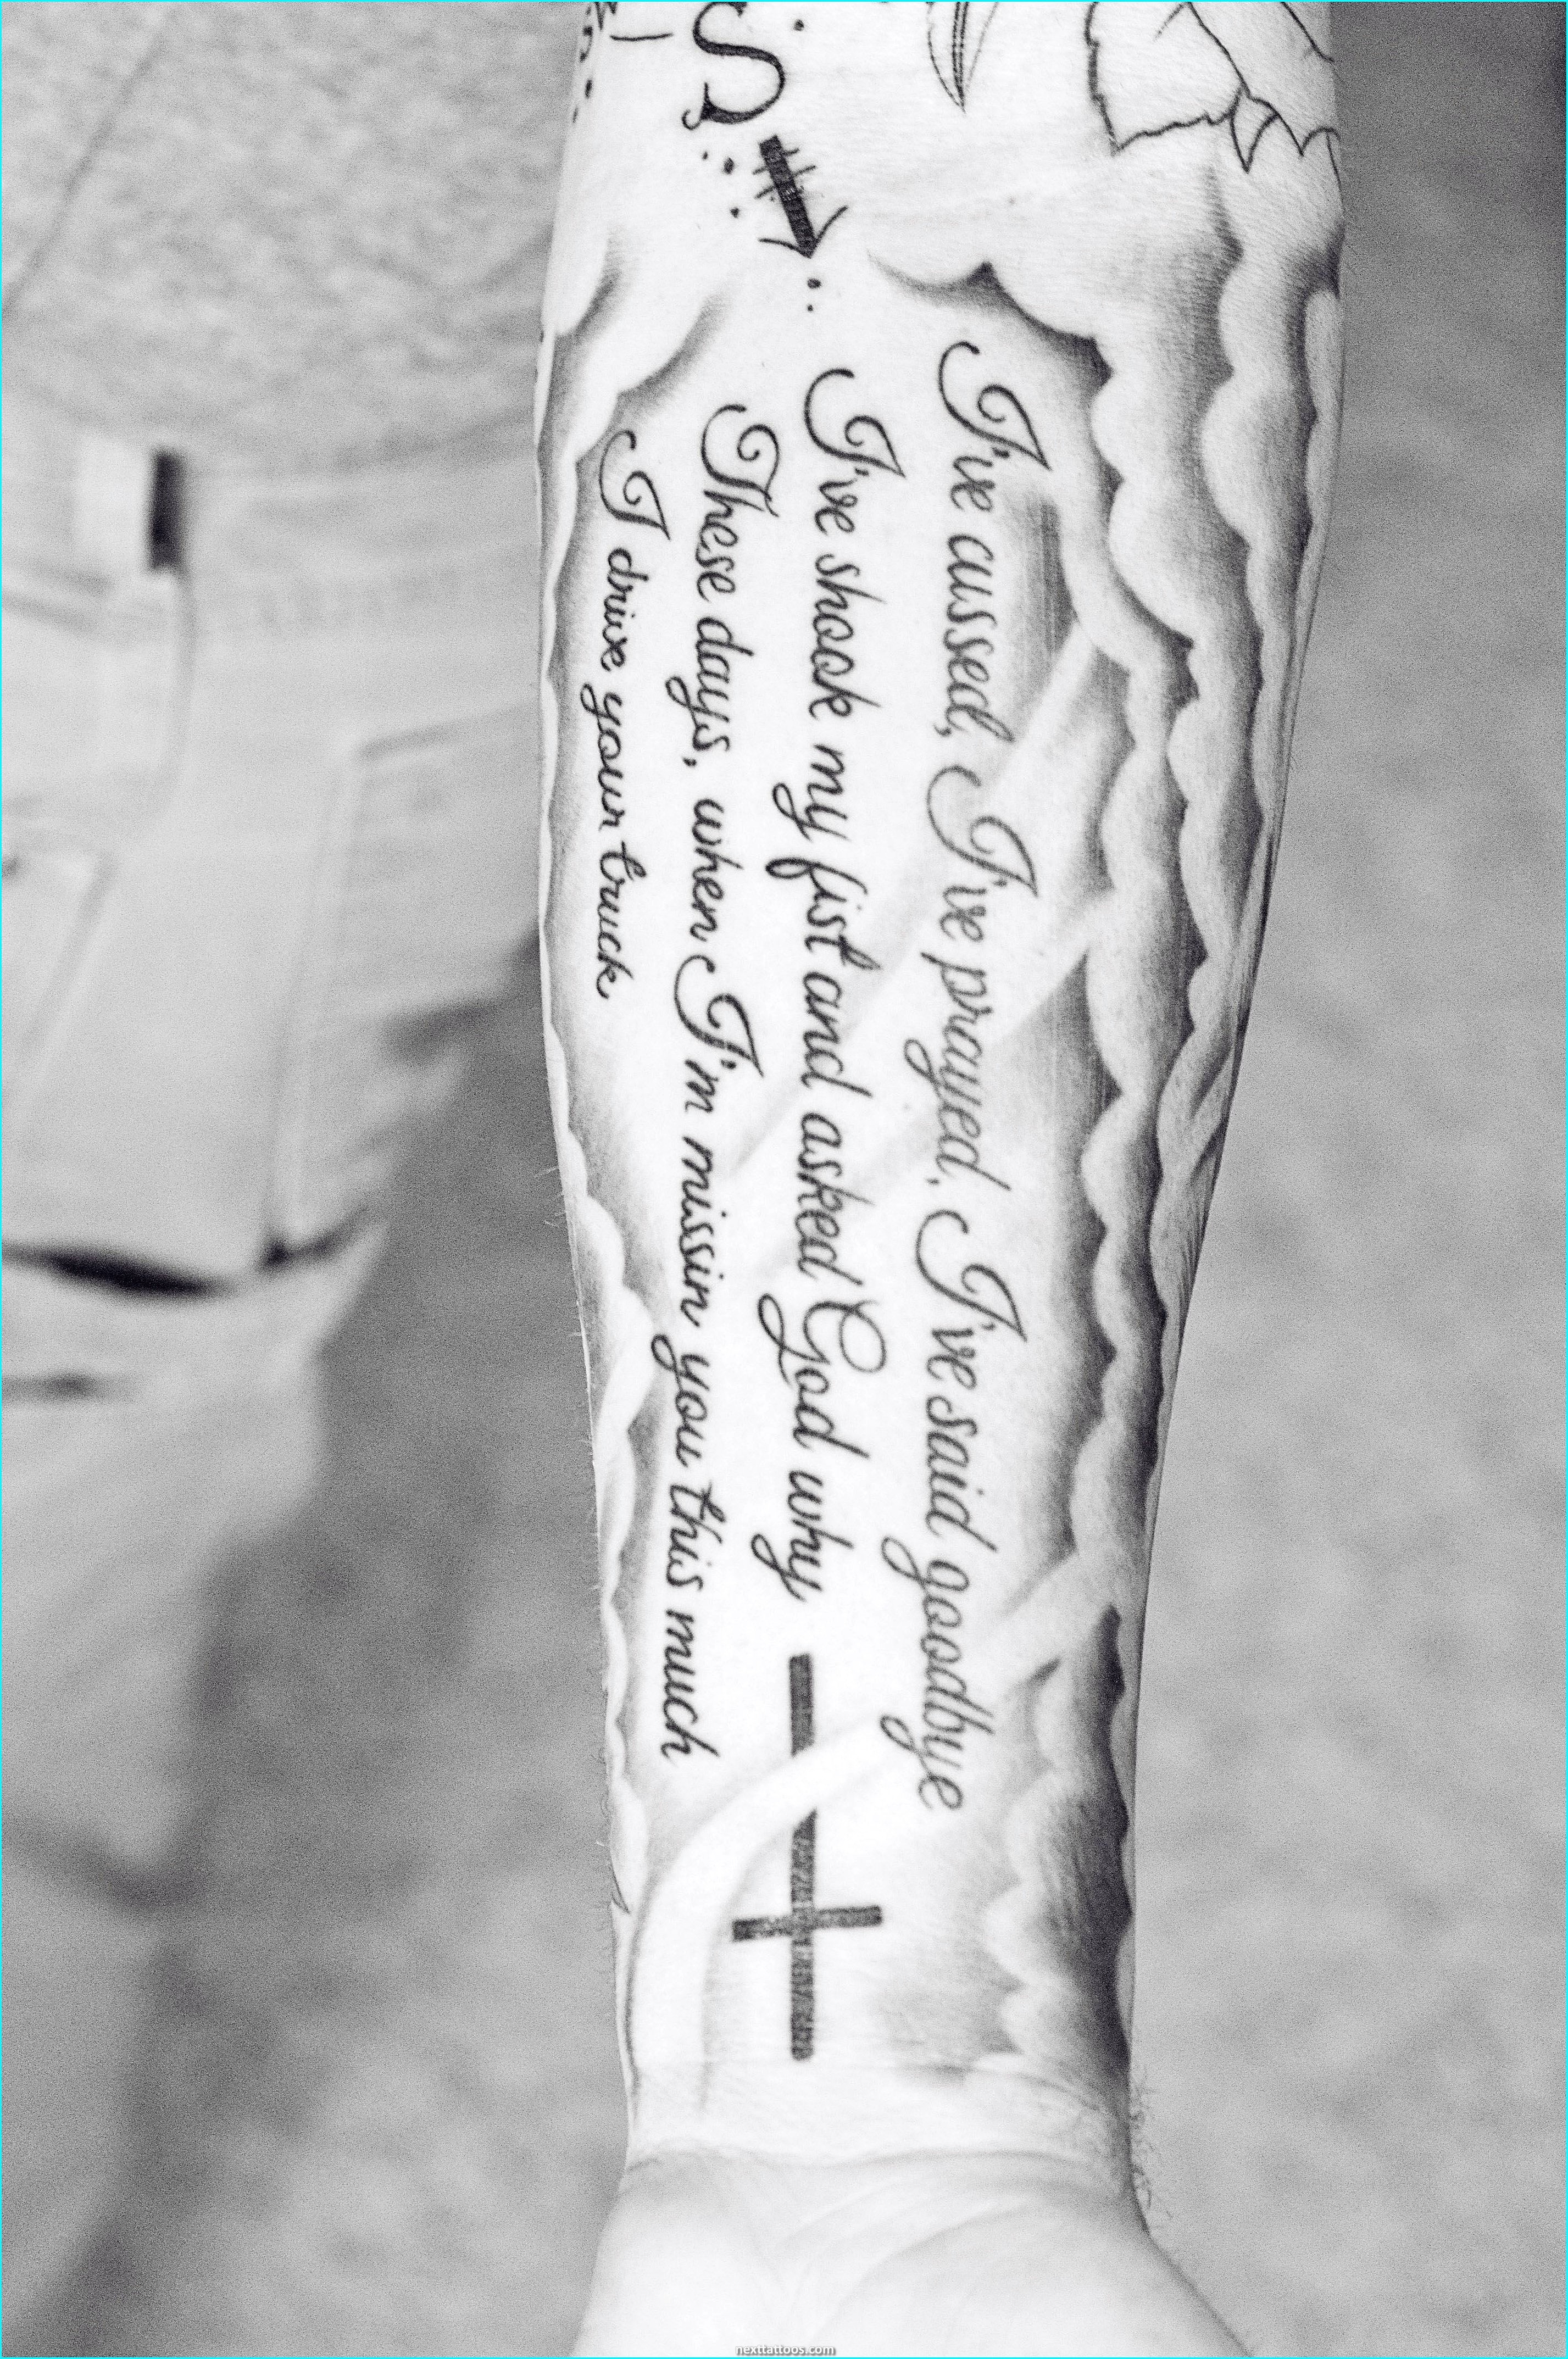 Scripture Tattoos on Your Arm With Clouds